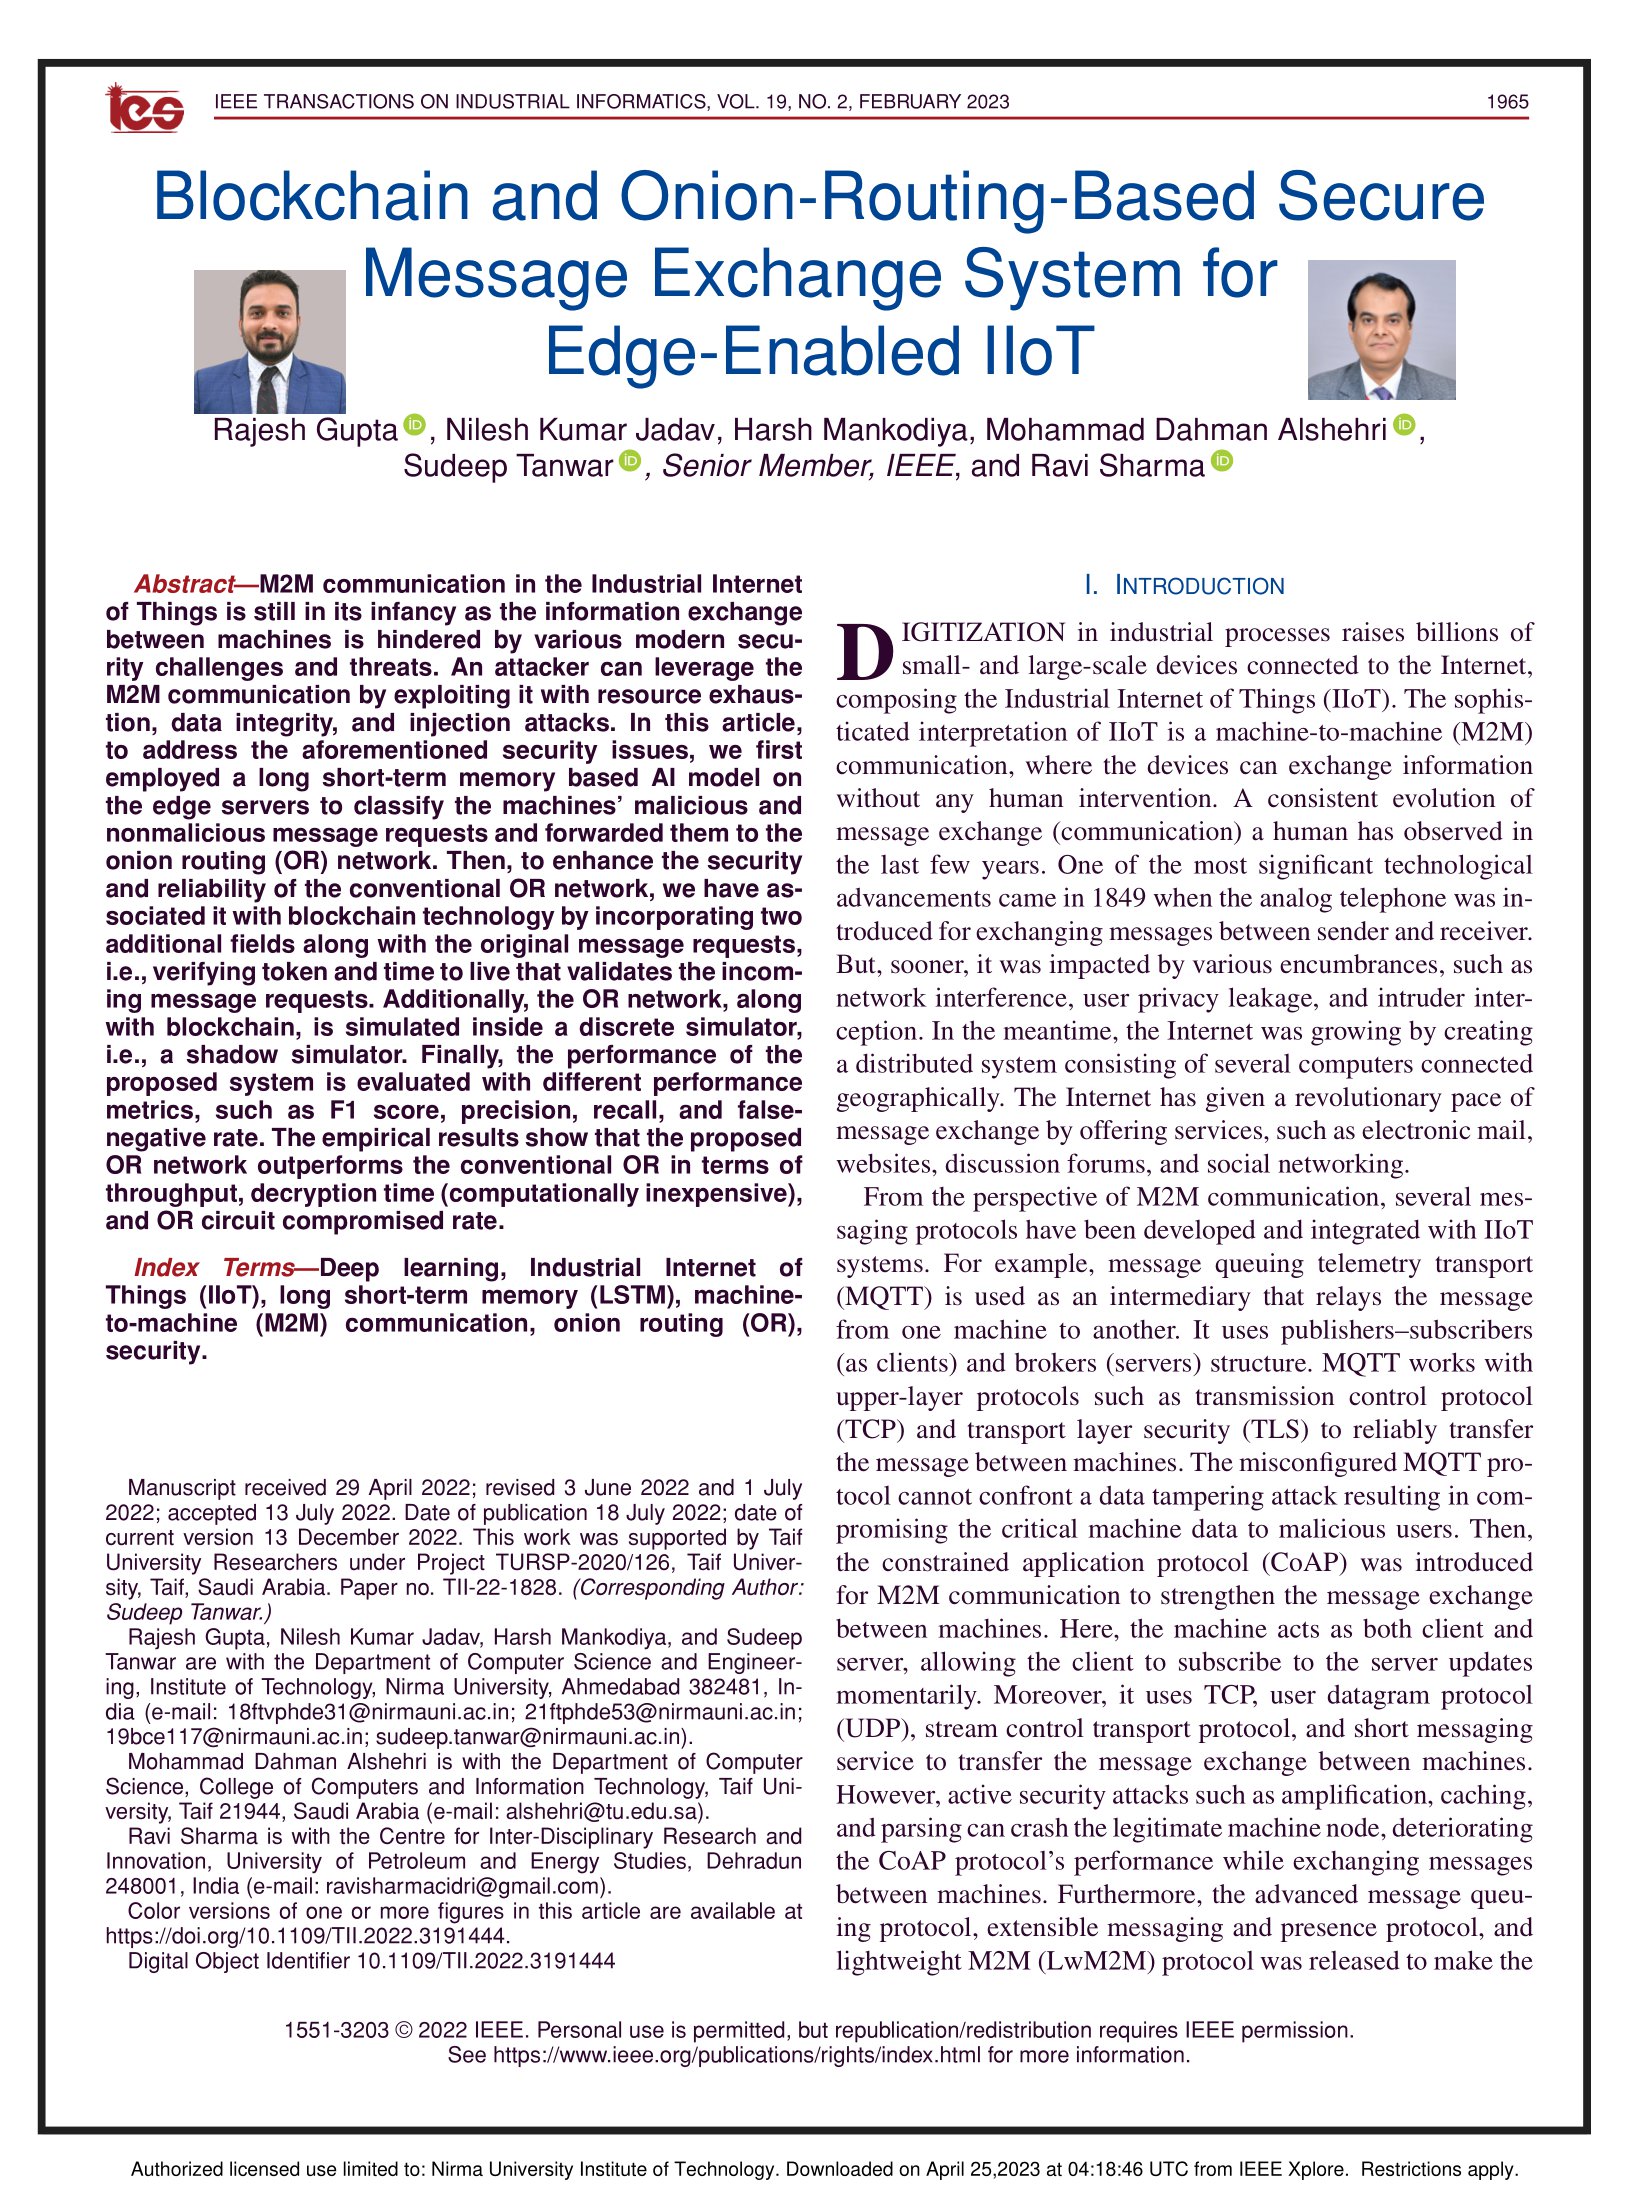 Blockchain and onion-routing-based secure message exchange system for edge-enabled IIOT